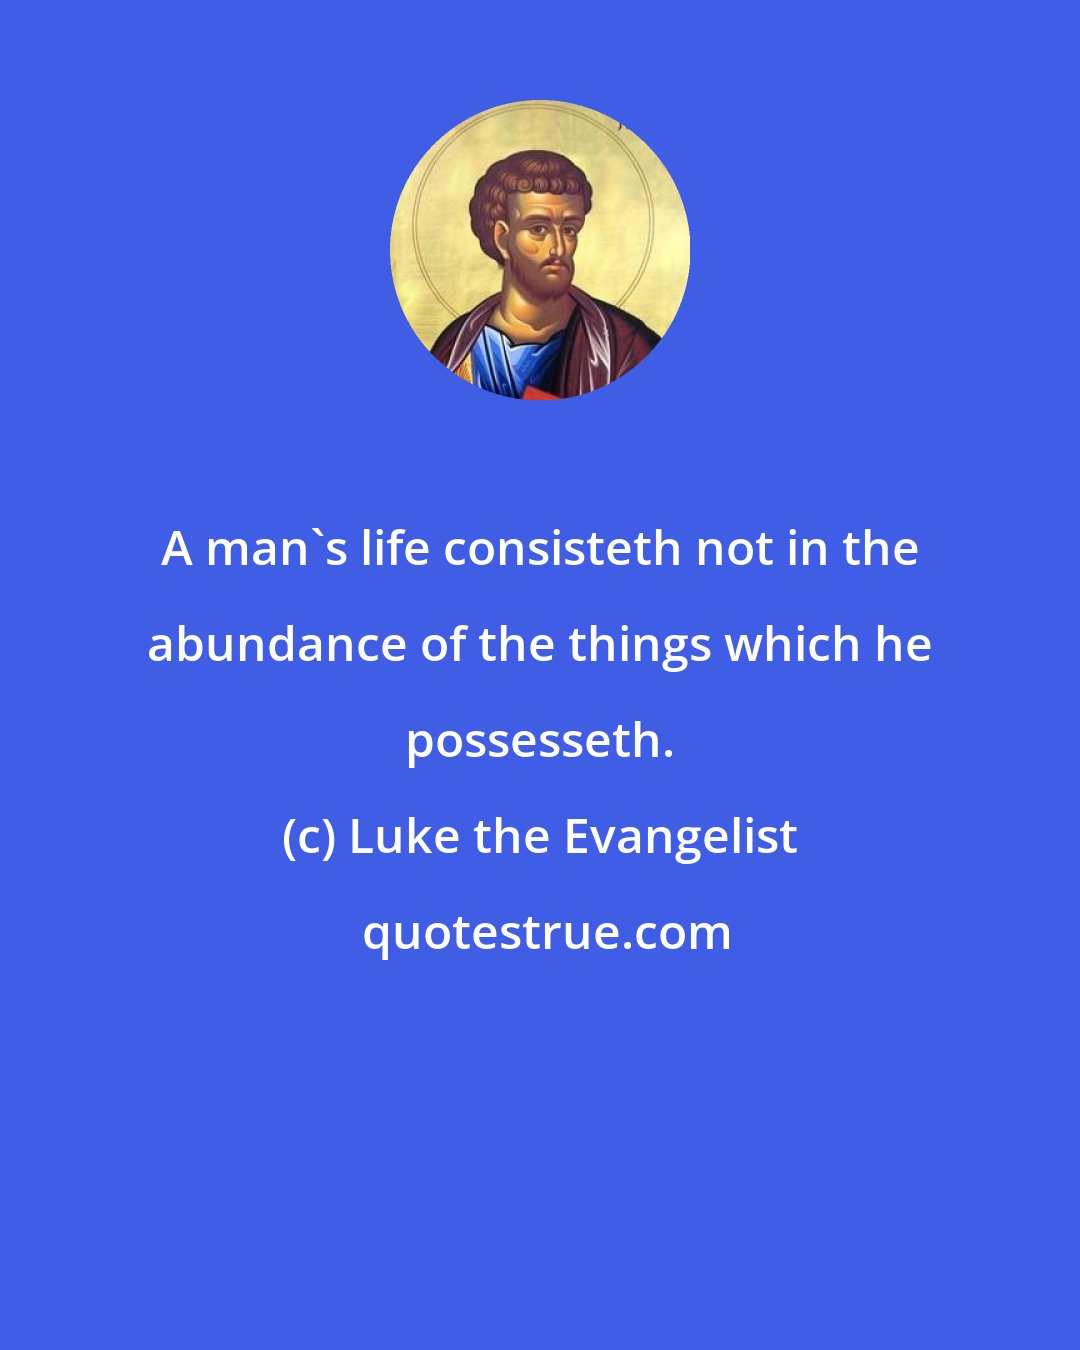 Luke the Evangelist: A man's life consisteth not in the abundance of the things which he possesseth.